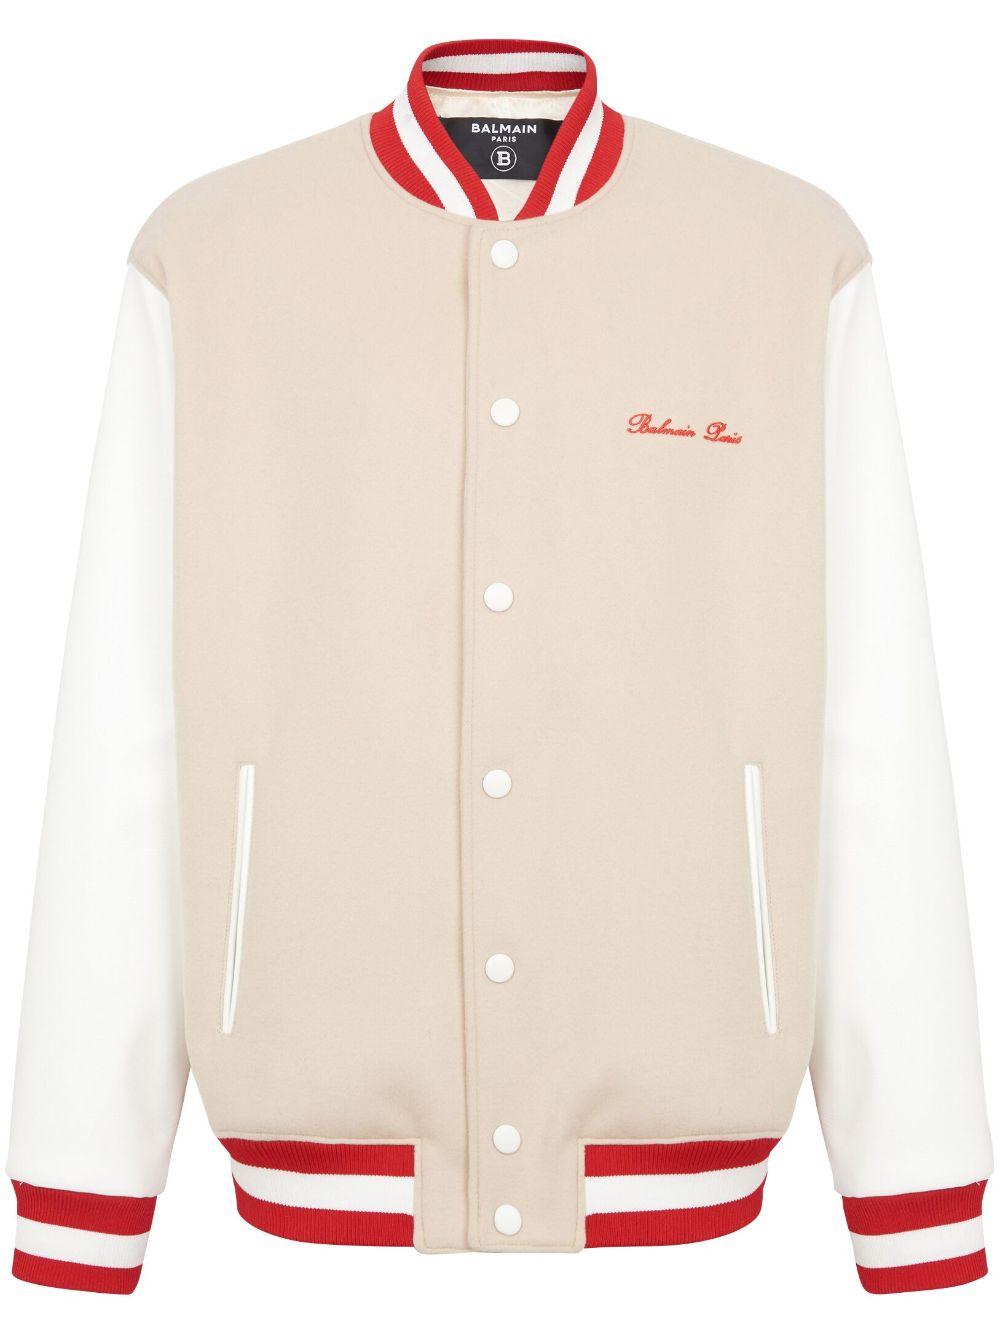 Shop Balmain Classic Wool Varsity Jacket With Signature Embroidery For Men In Tan